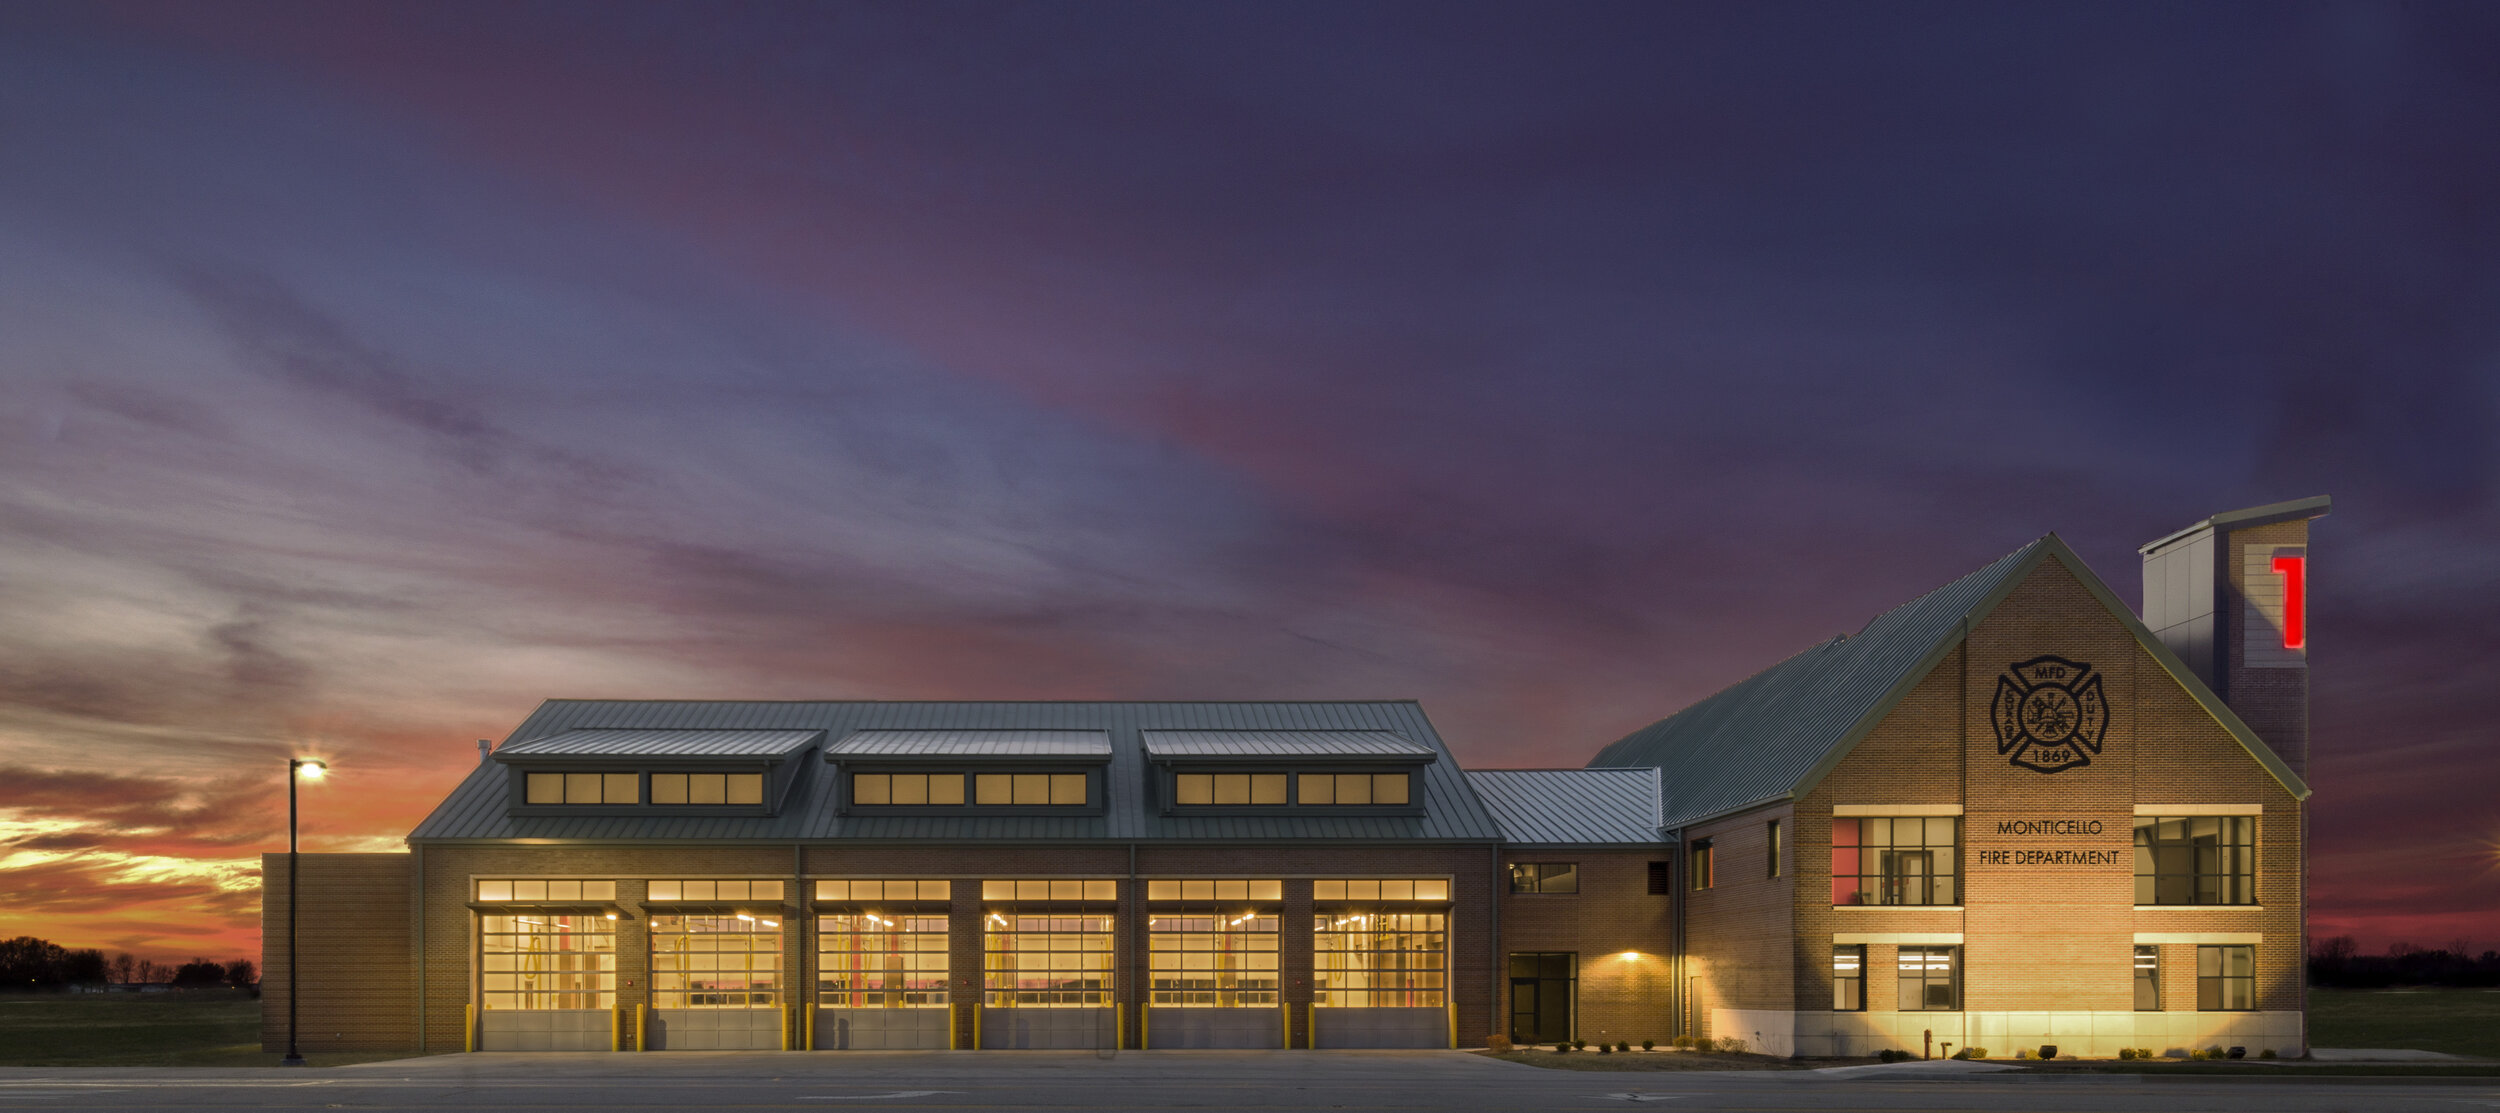 A stunning architectural photo of a fire department building at twilight.